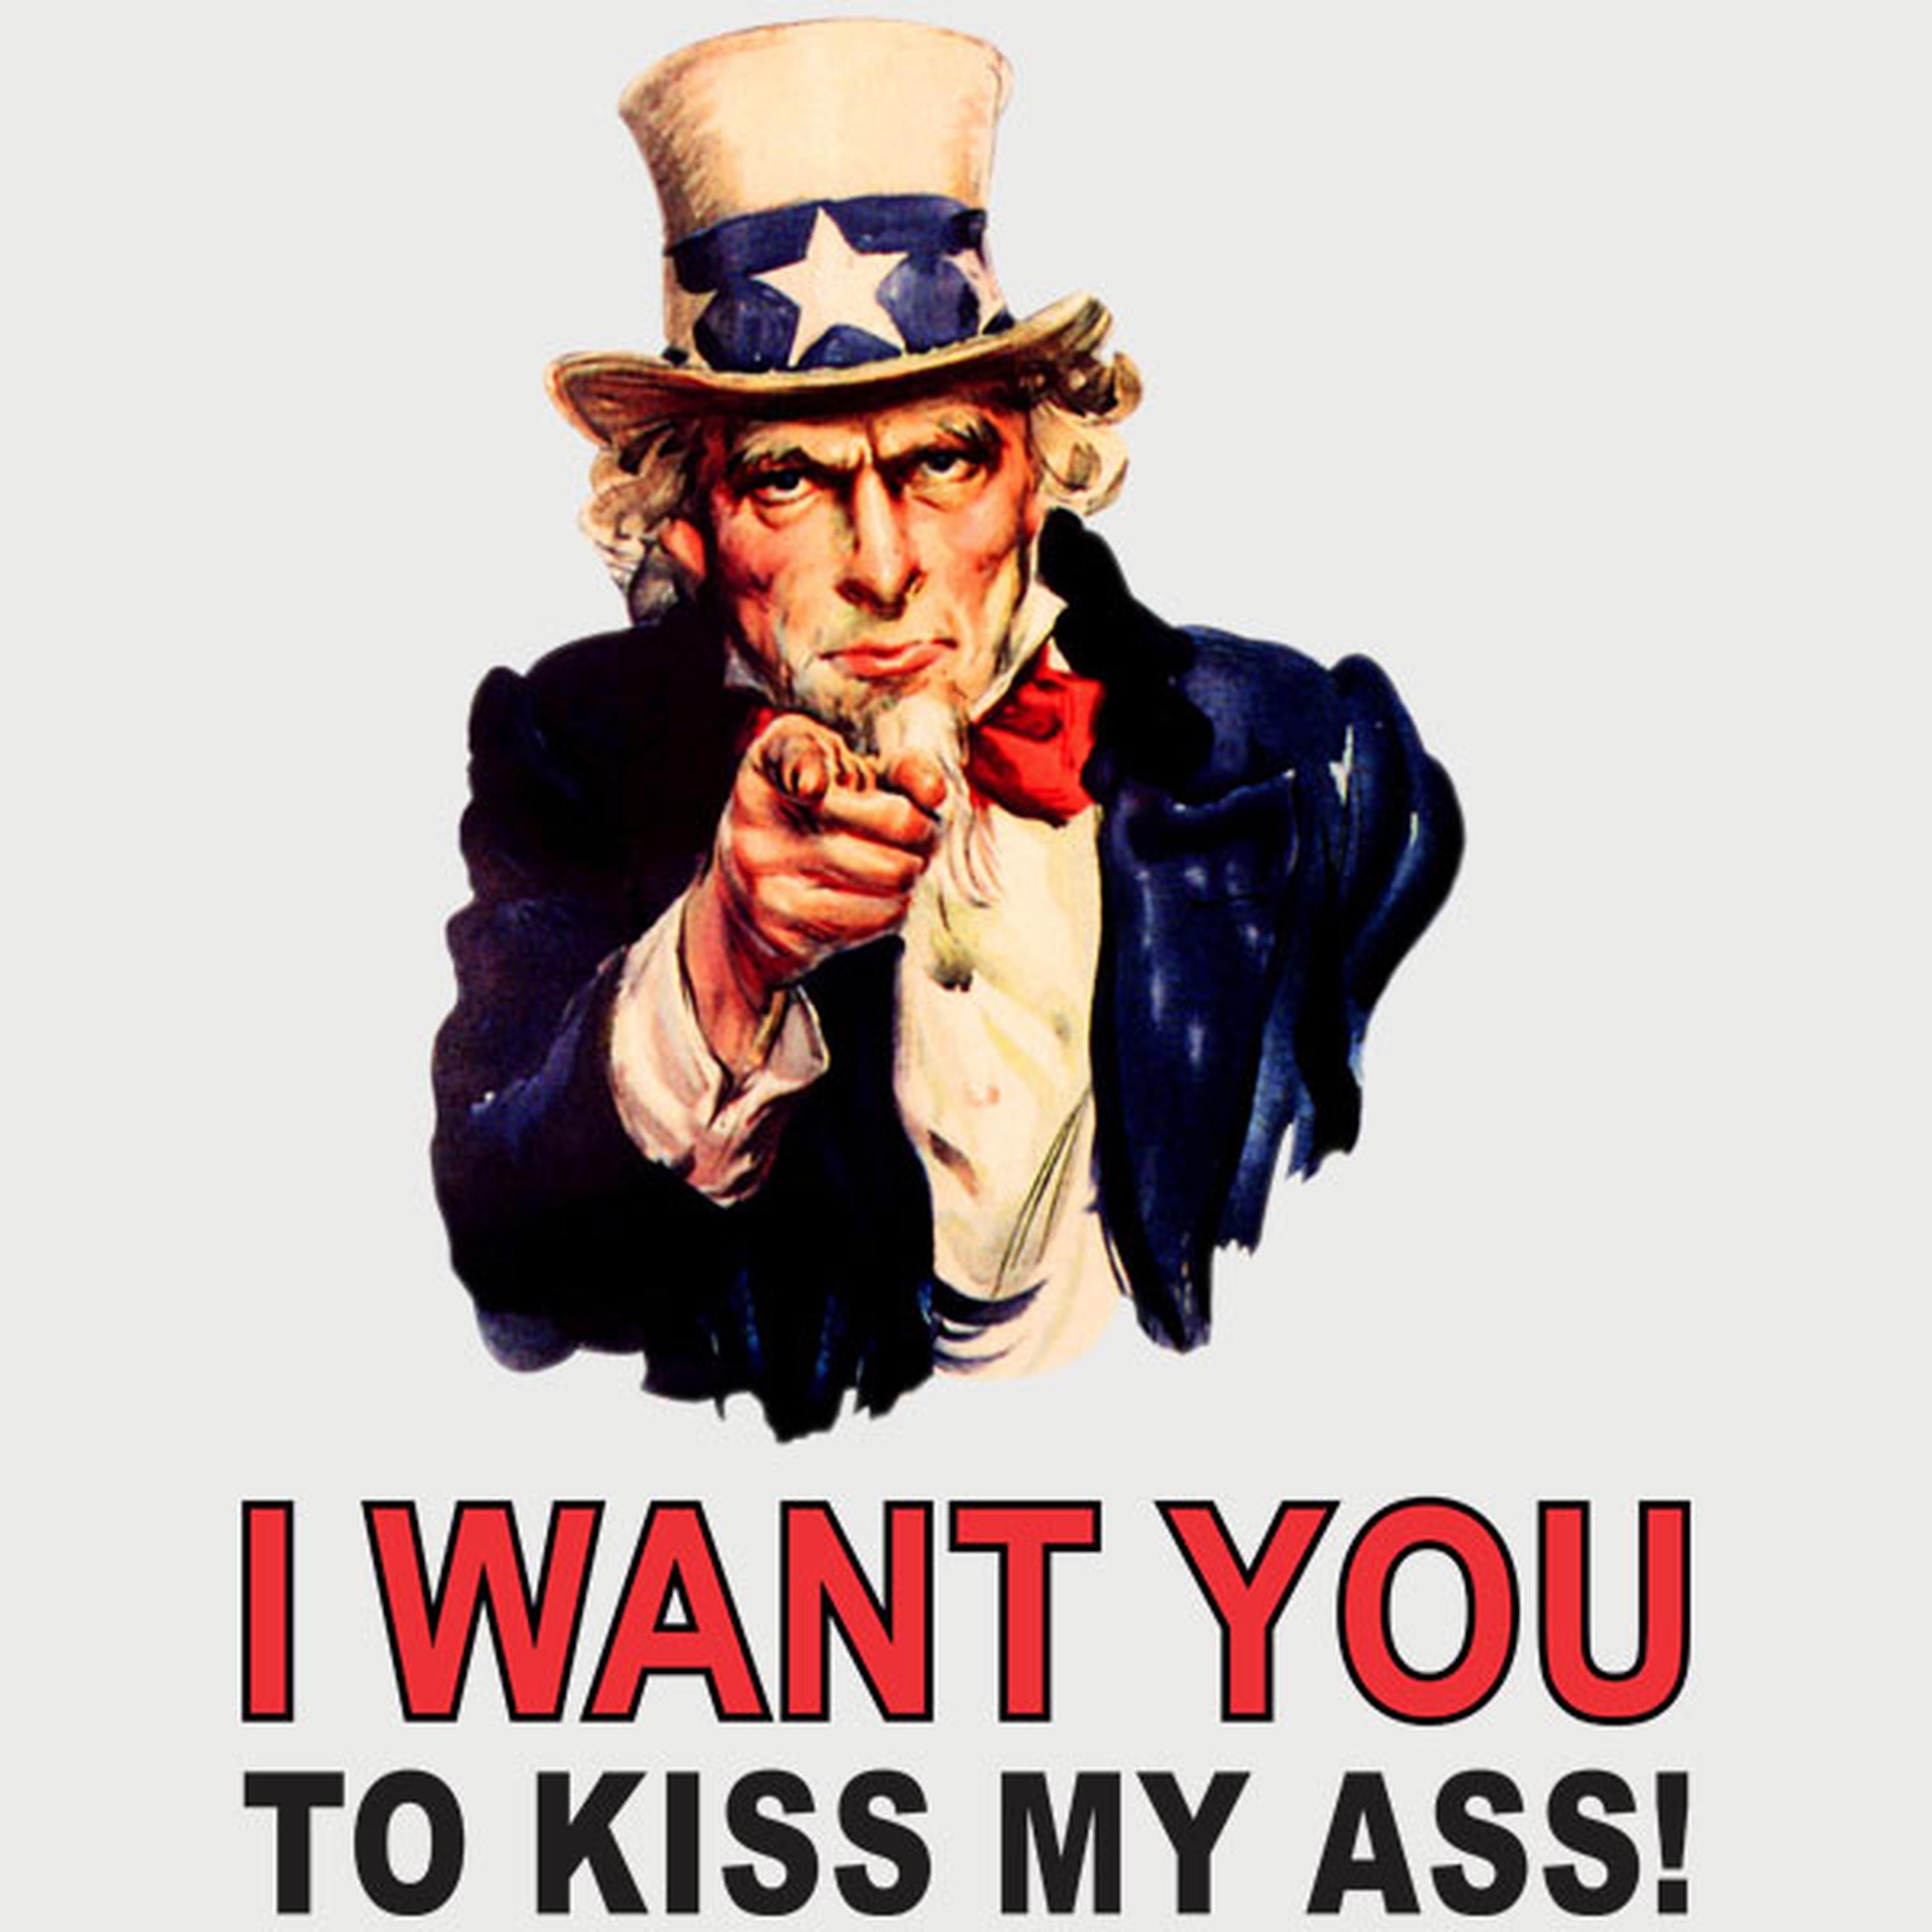 I want you to kiss my ass